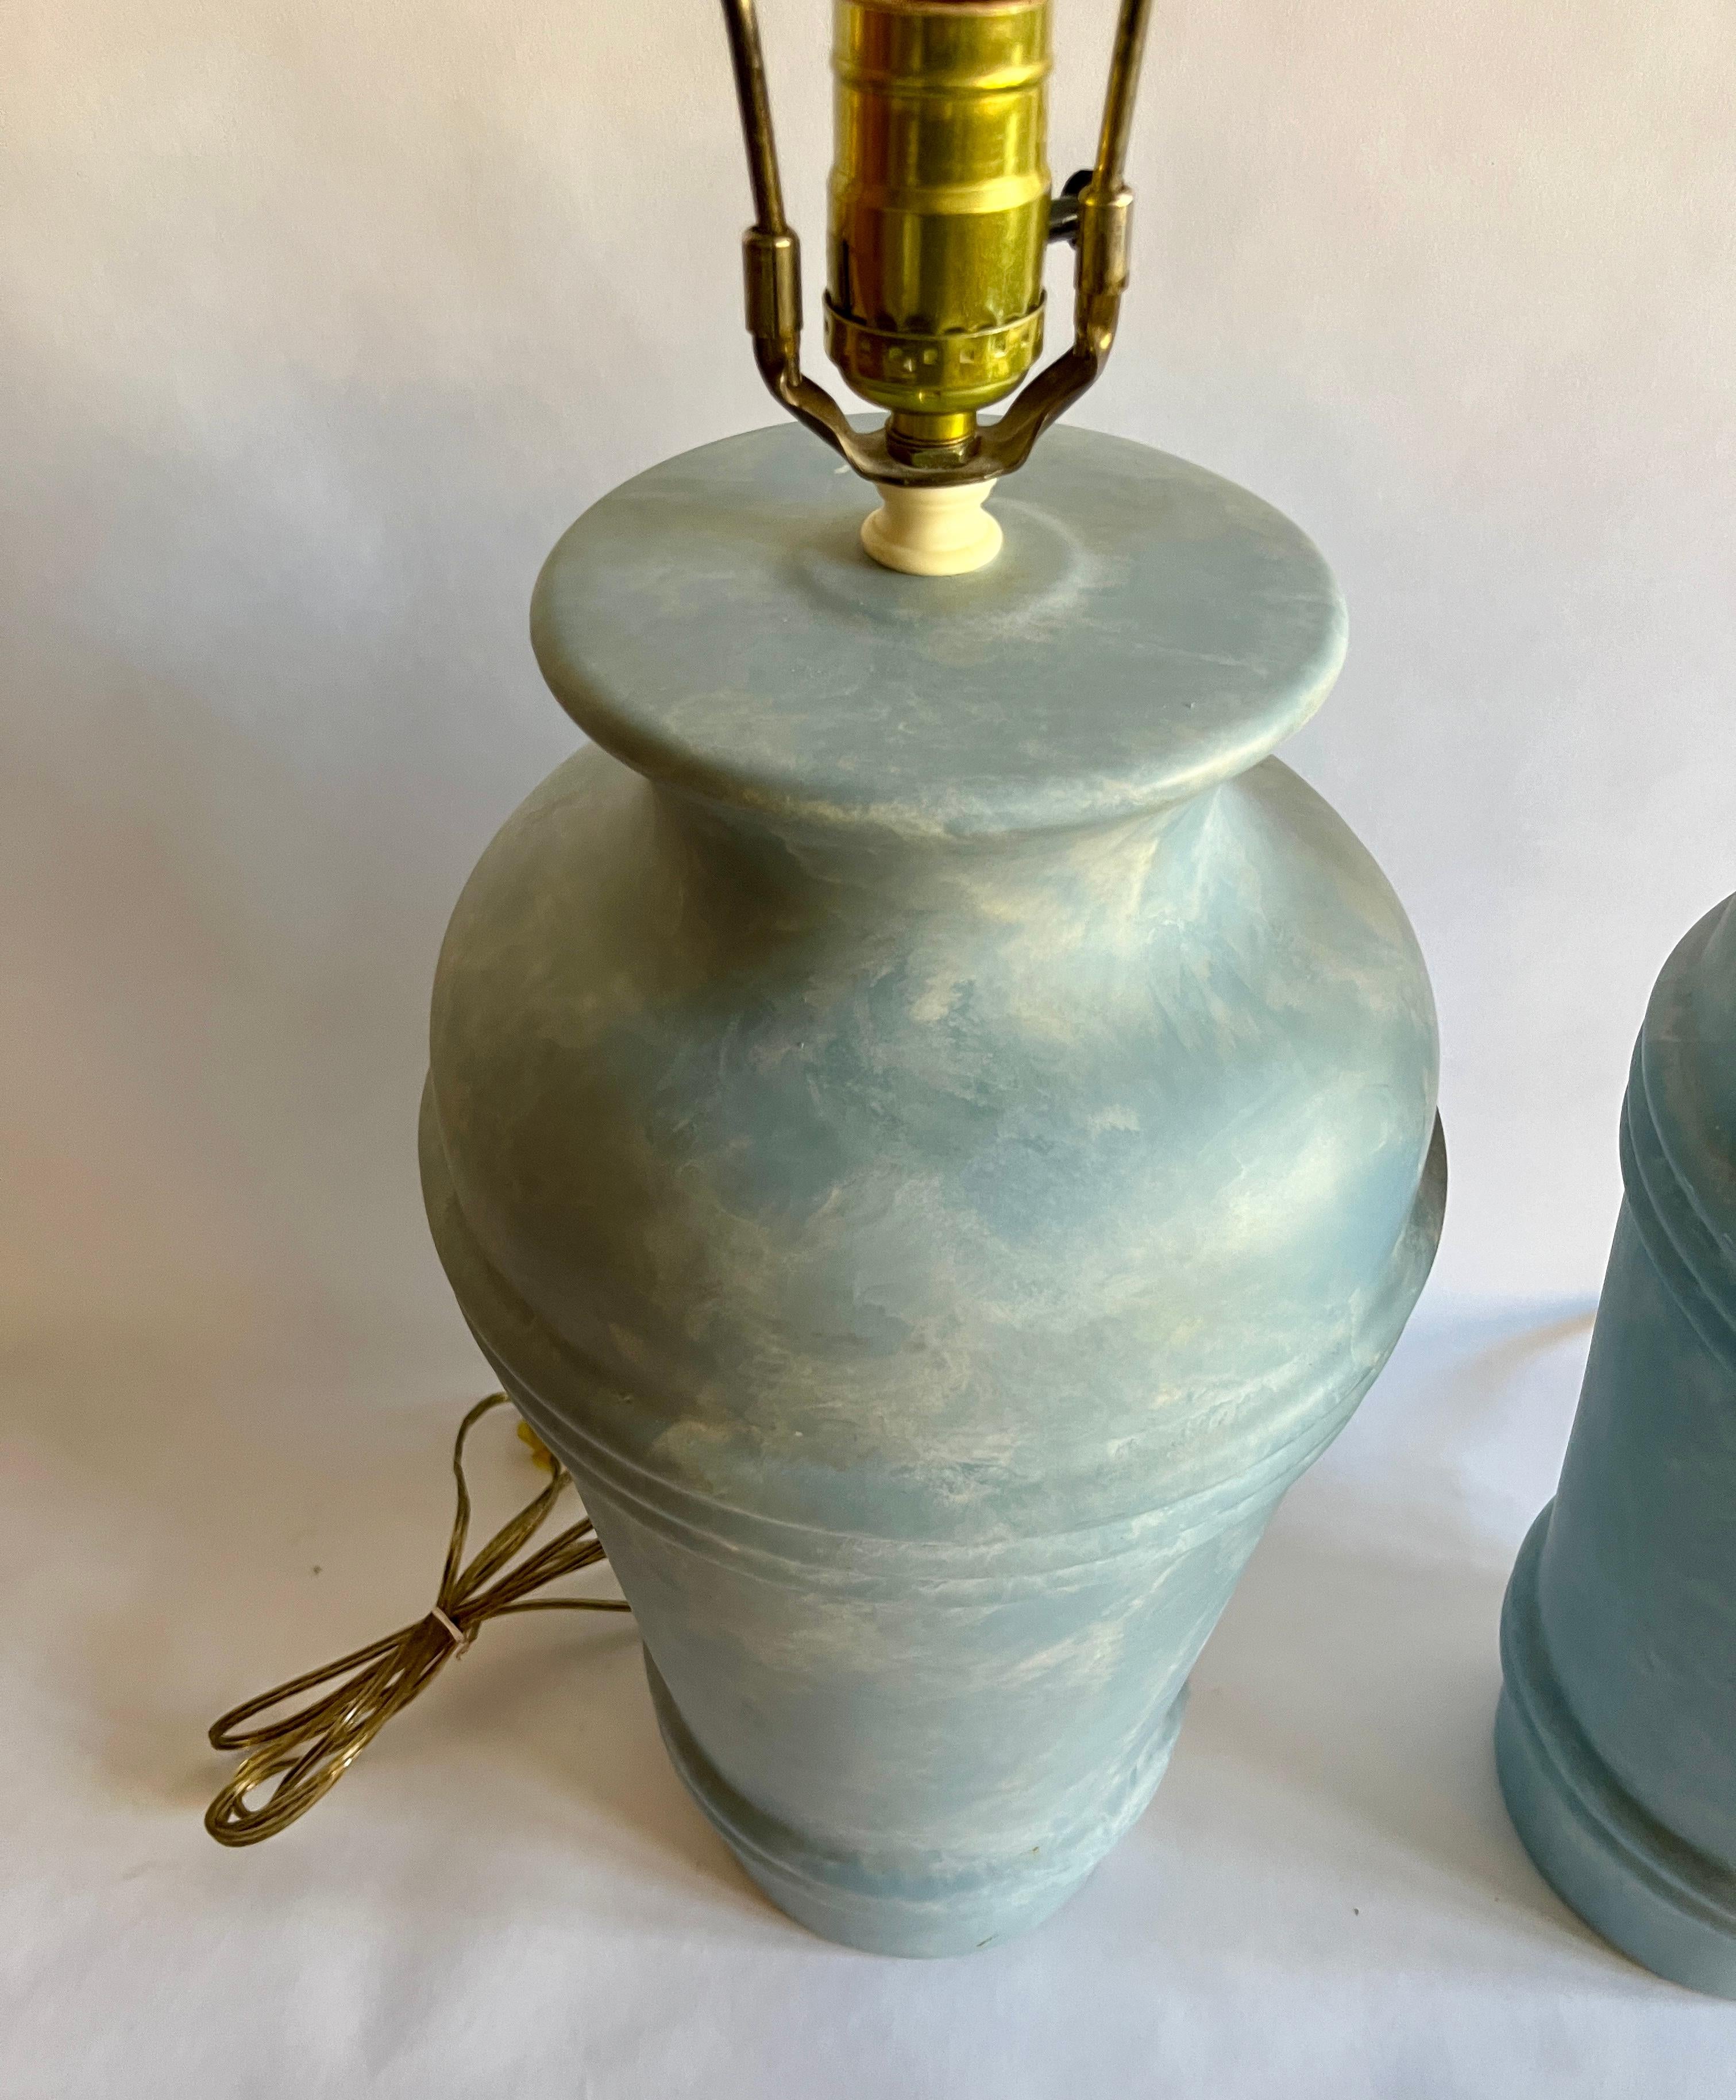 Pair of Post-modern ceramic table lamps by Regal China with two sets of ribbed banding and swirled light blue glaze. Original wiring in working order. Includes harps. No lampshades included.

Each measures 18